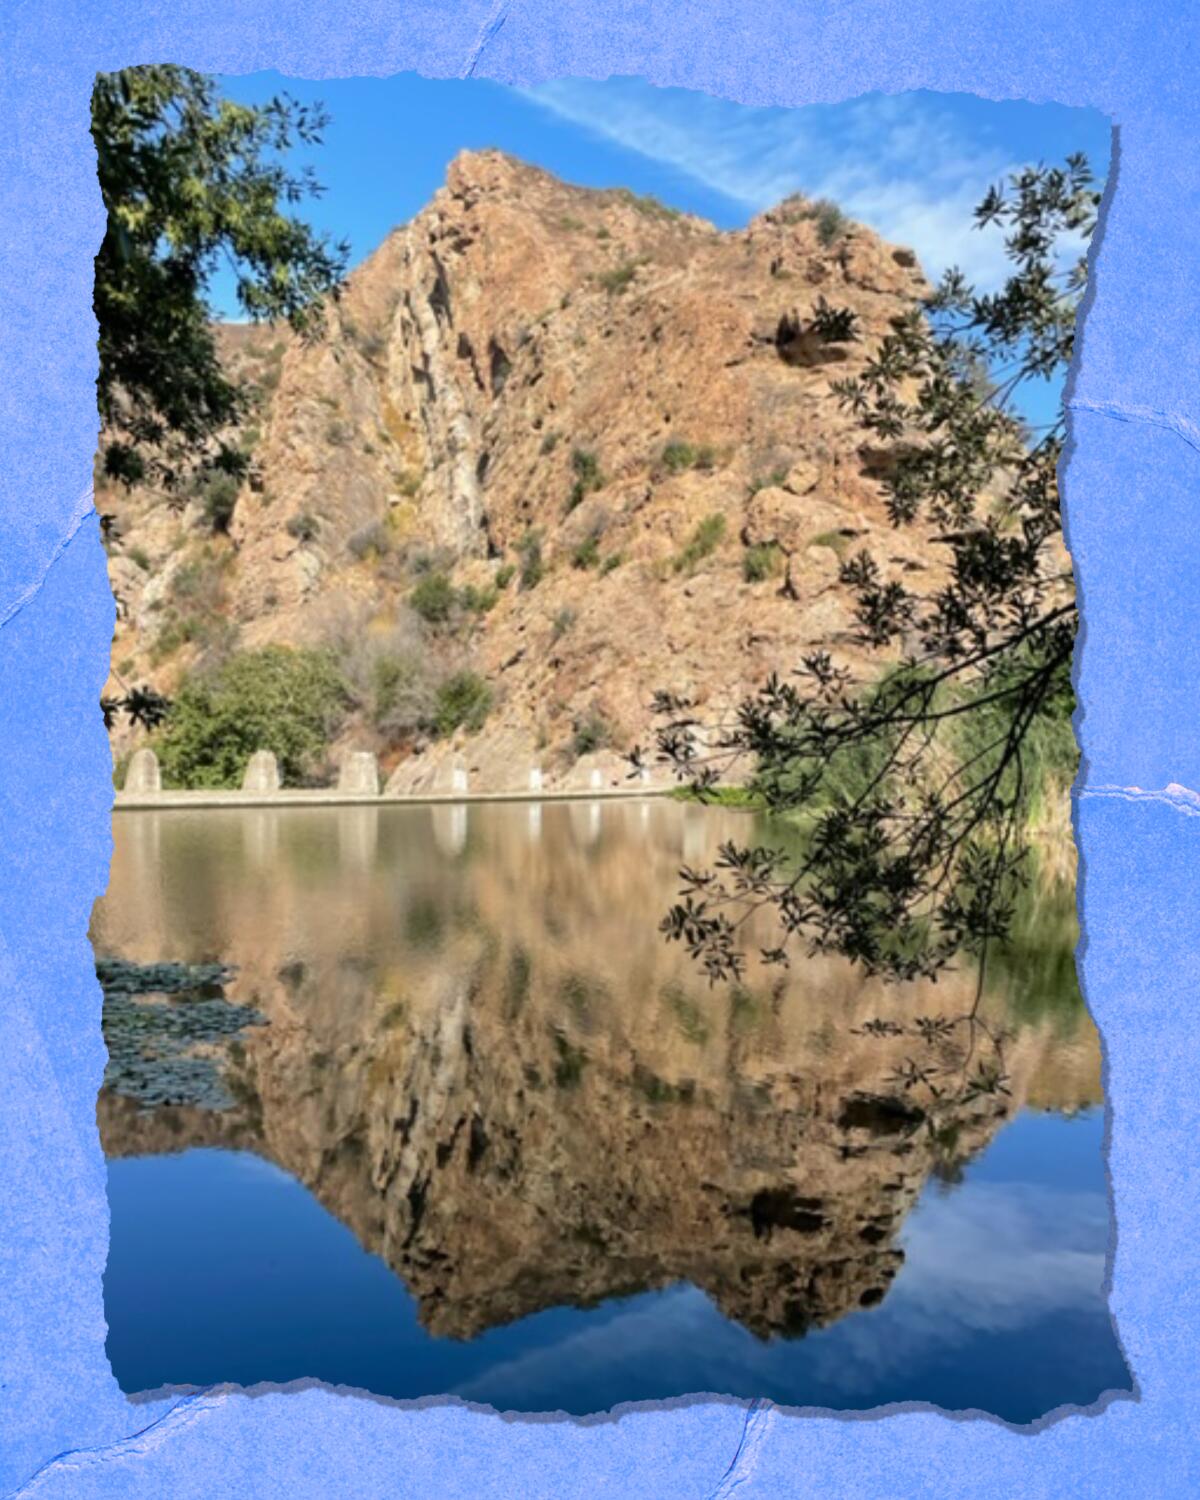 A jagged hill is reflected in a still body of water.